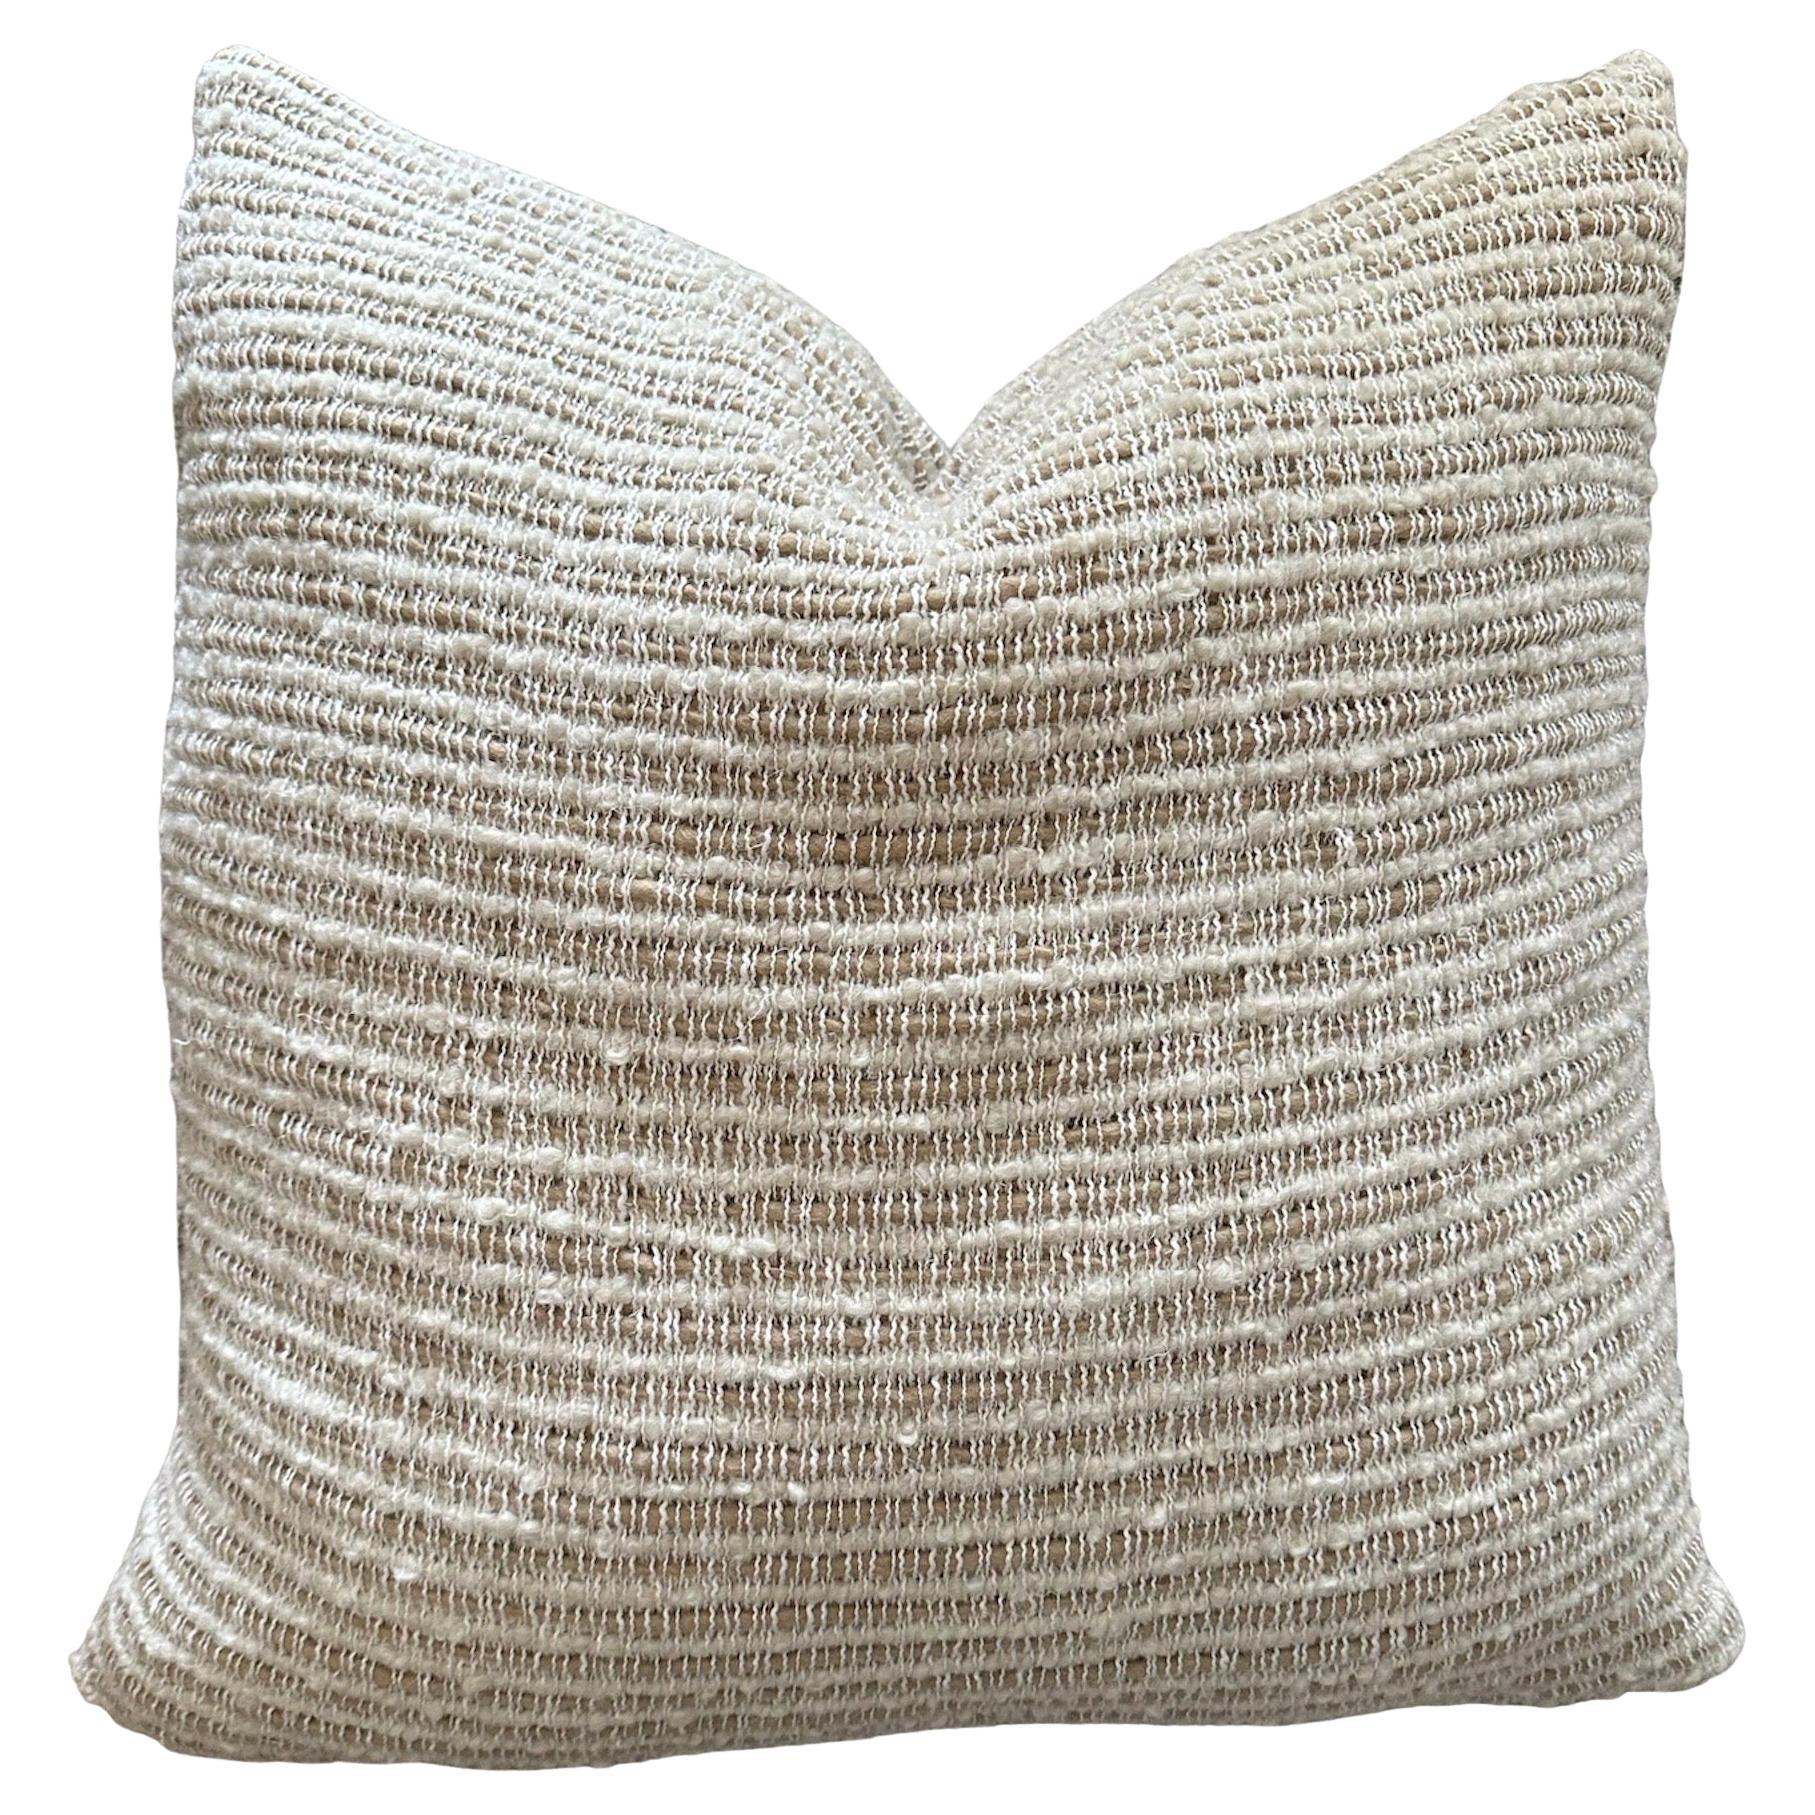 Wool and Linen Accent Pillow with Down Feather Insert For Sale